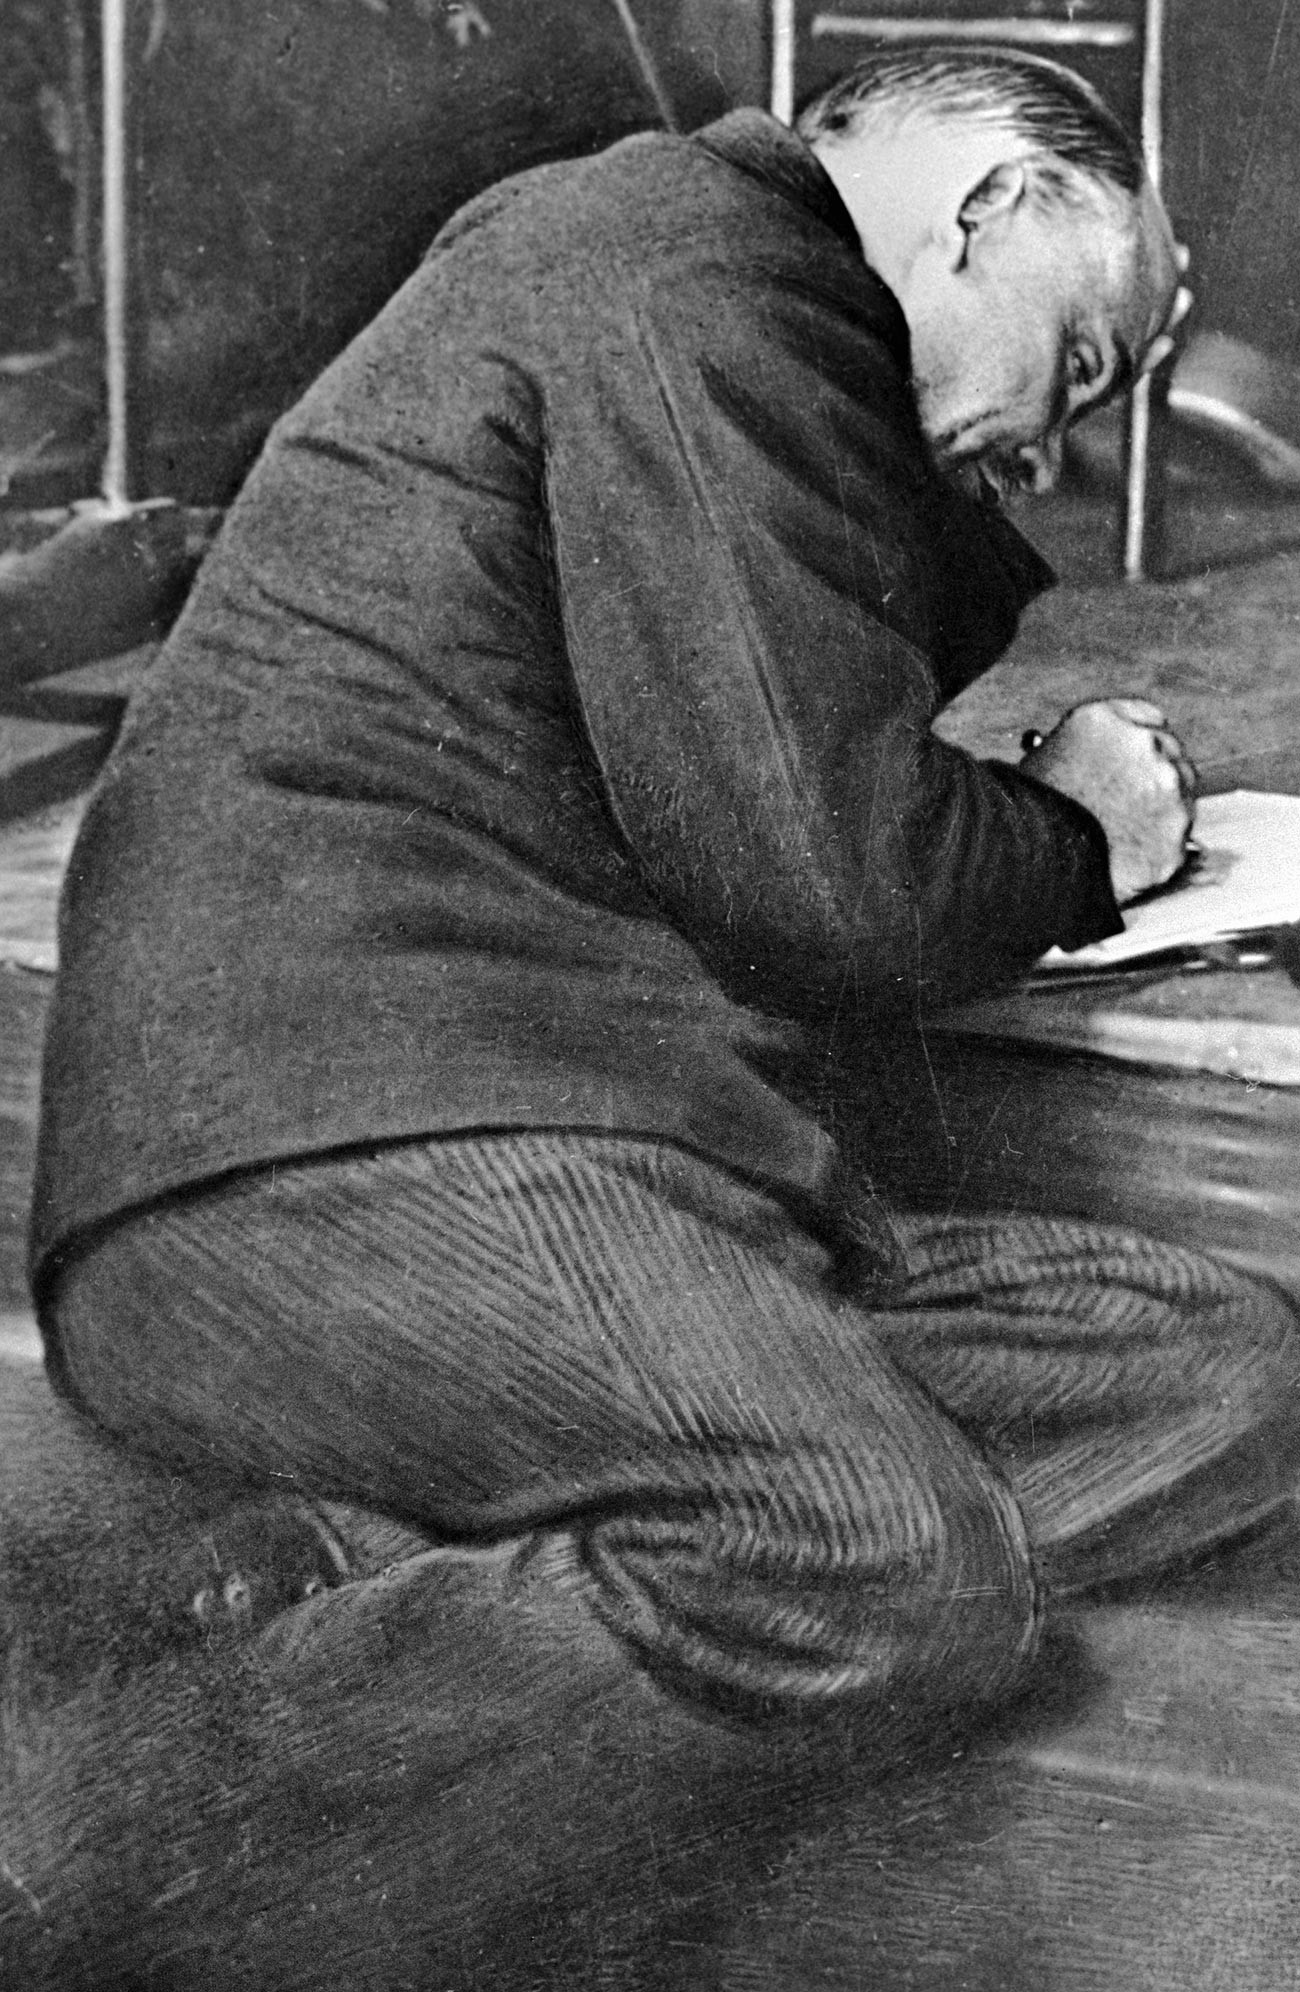 Lenin taking notes at the Third Congress of the Comintern in the Kremlin 